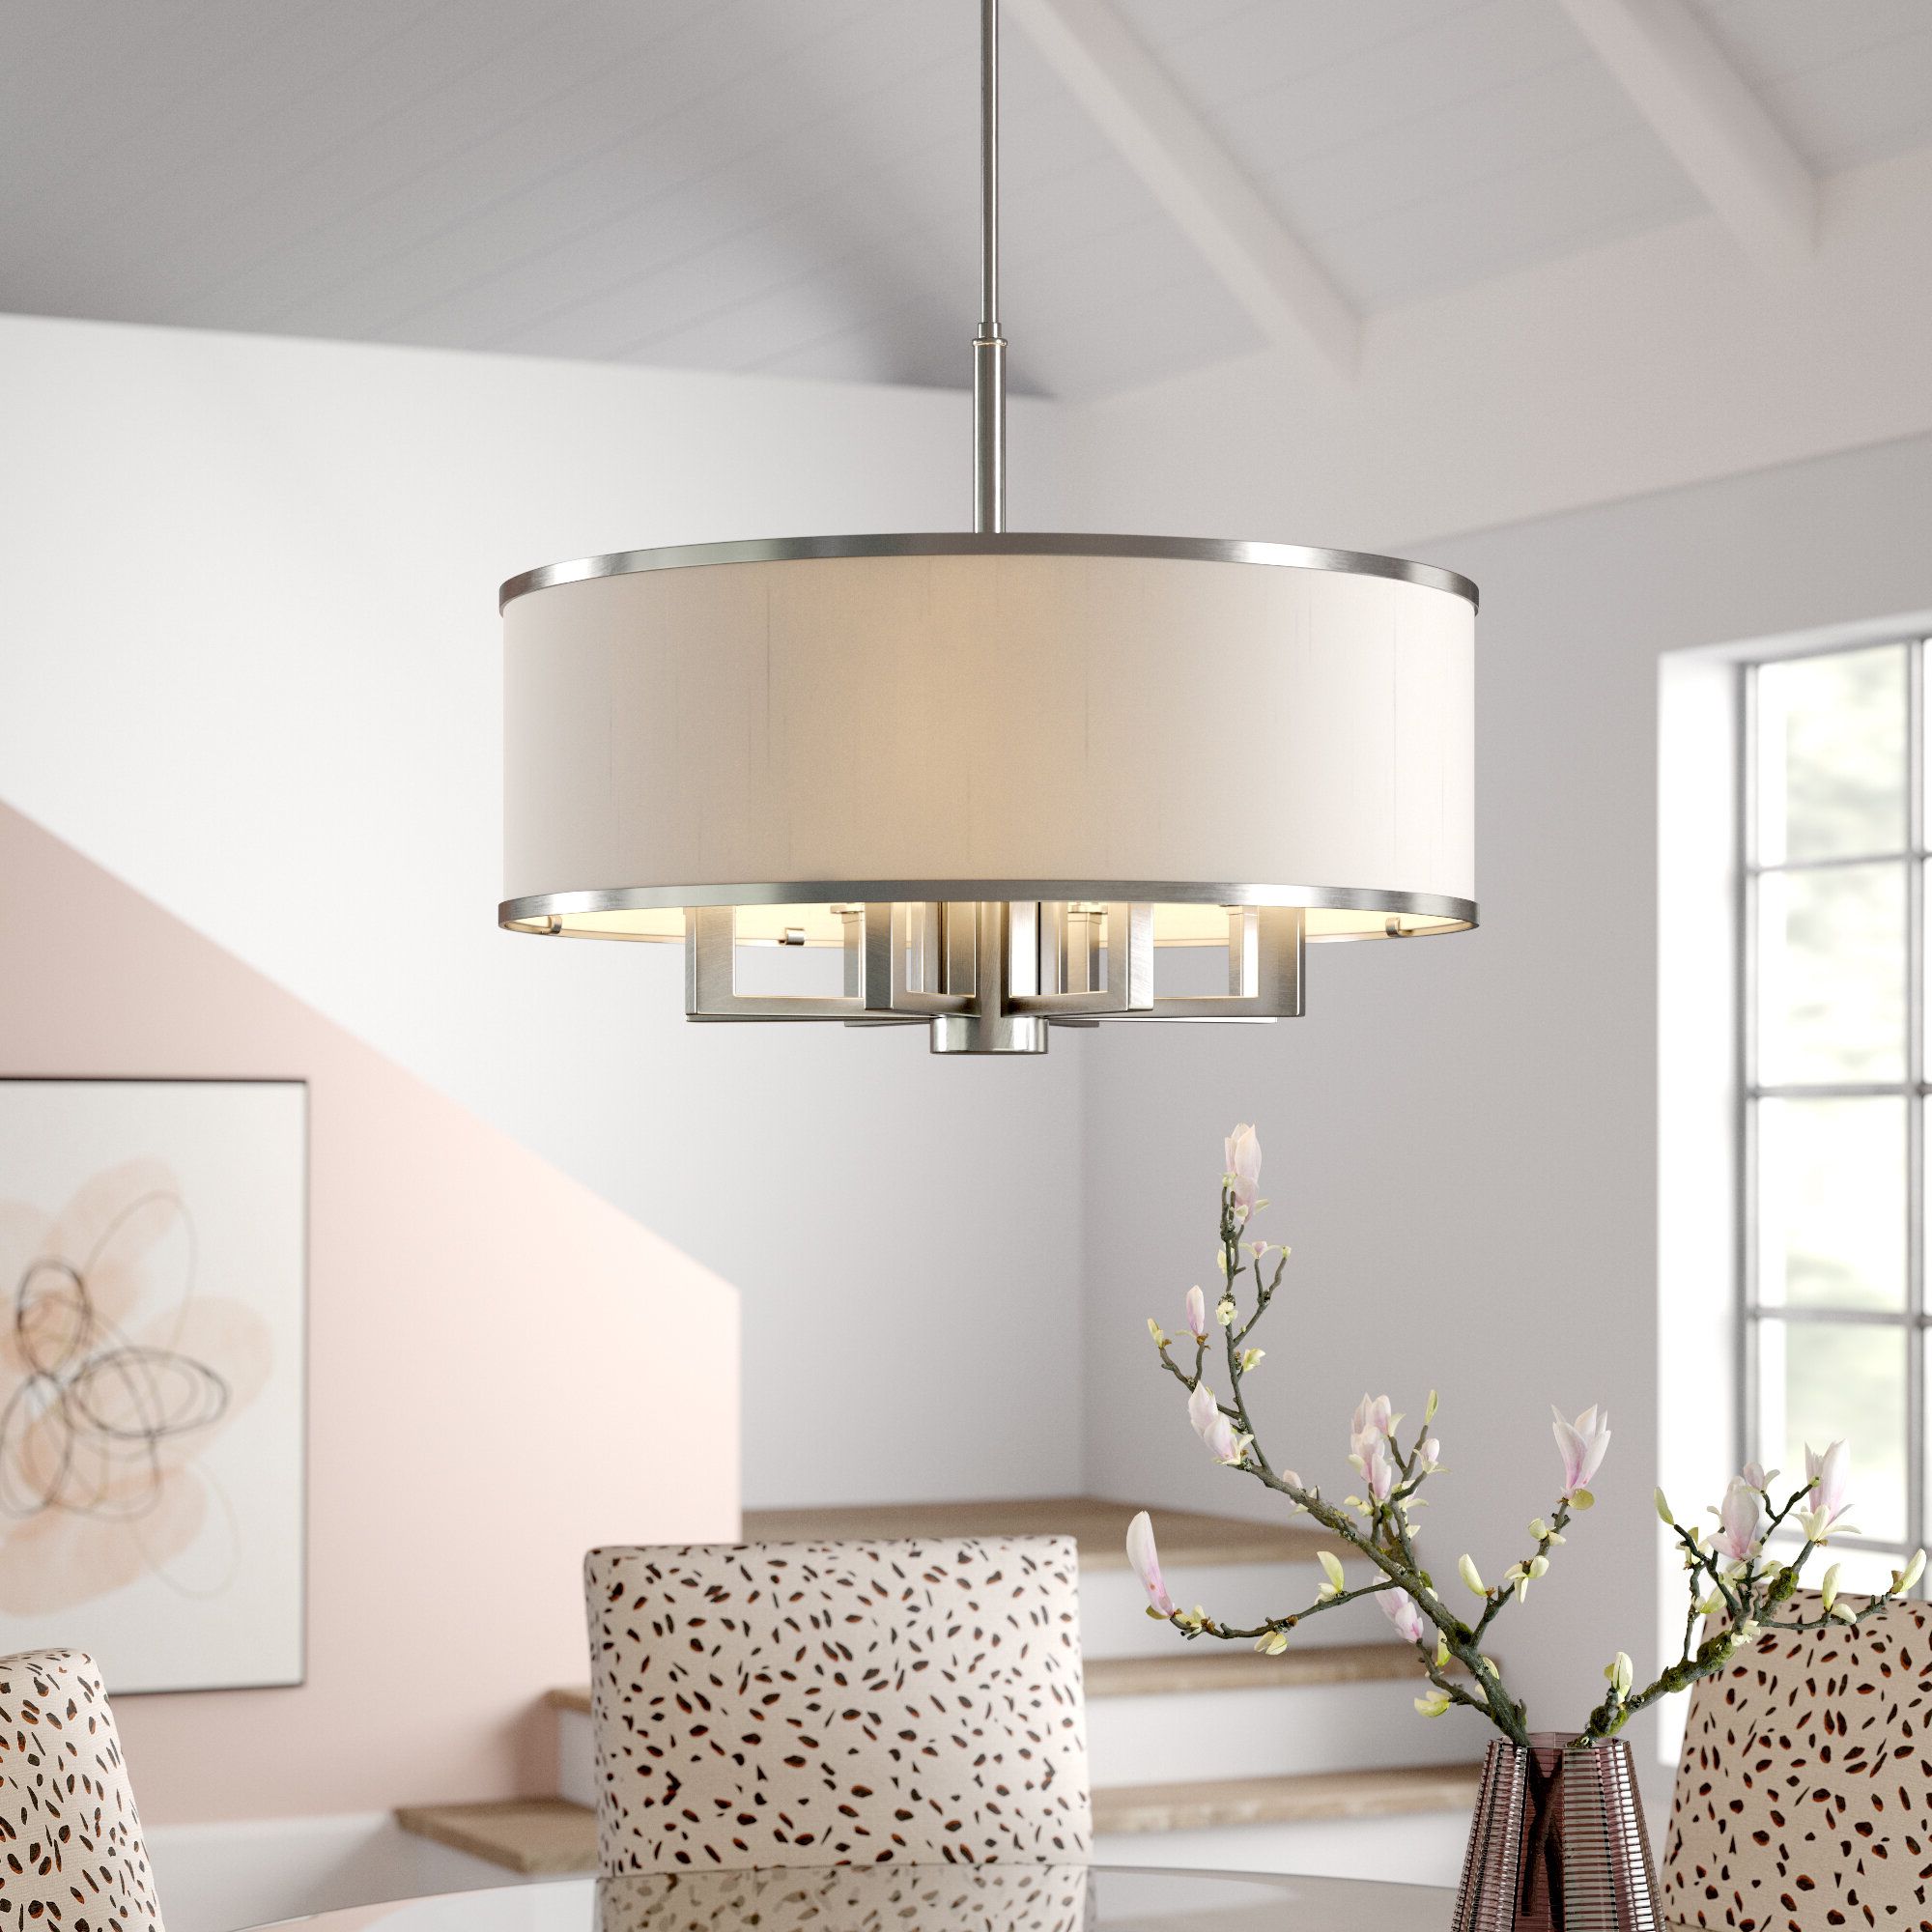 Breithaup 7 Light Drum Chandelier With Well Liked Wadlington 5 Light Drum Chandeliers (View 10 of 25)